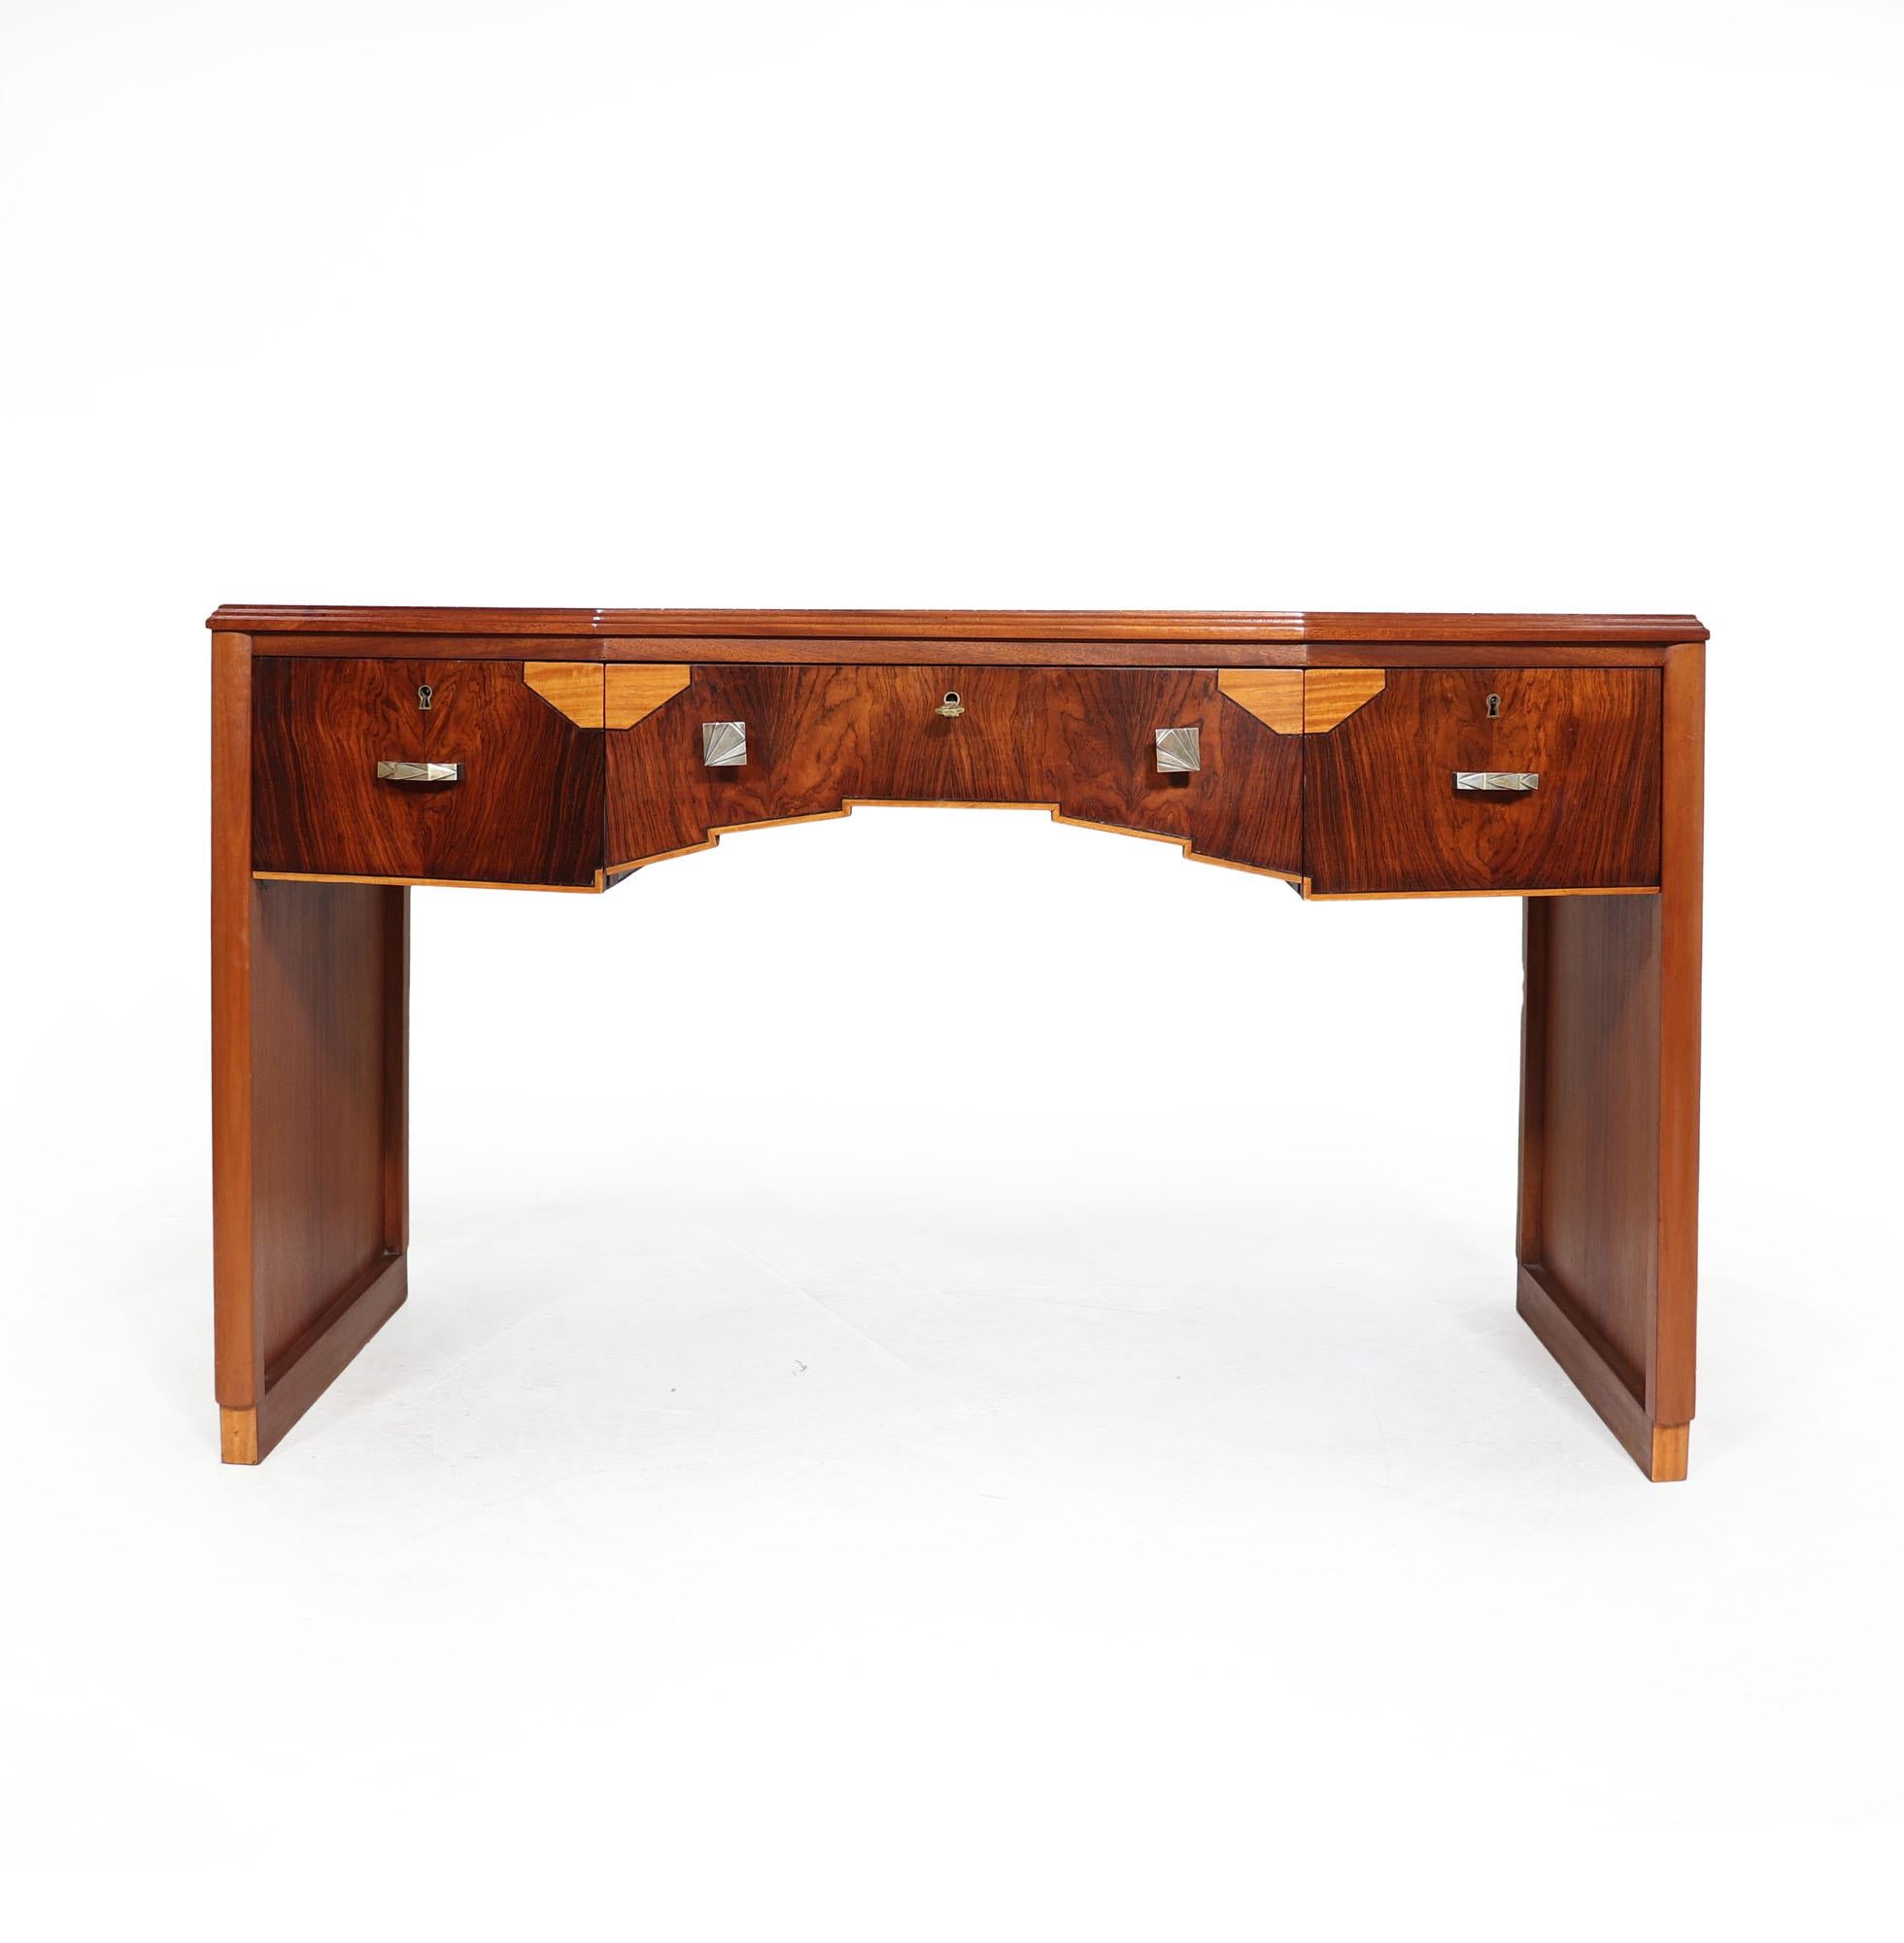 Early 20th Century French Art Deco Rosewood Desk